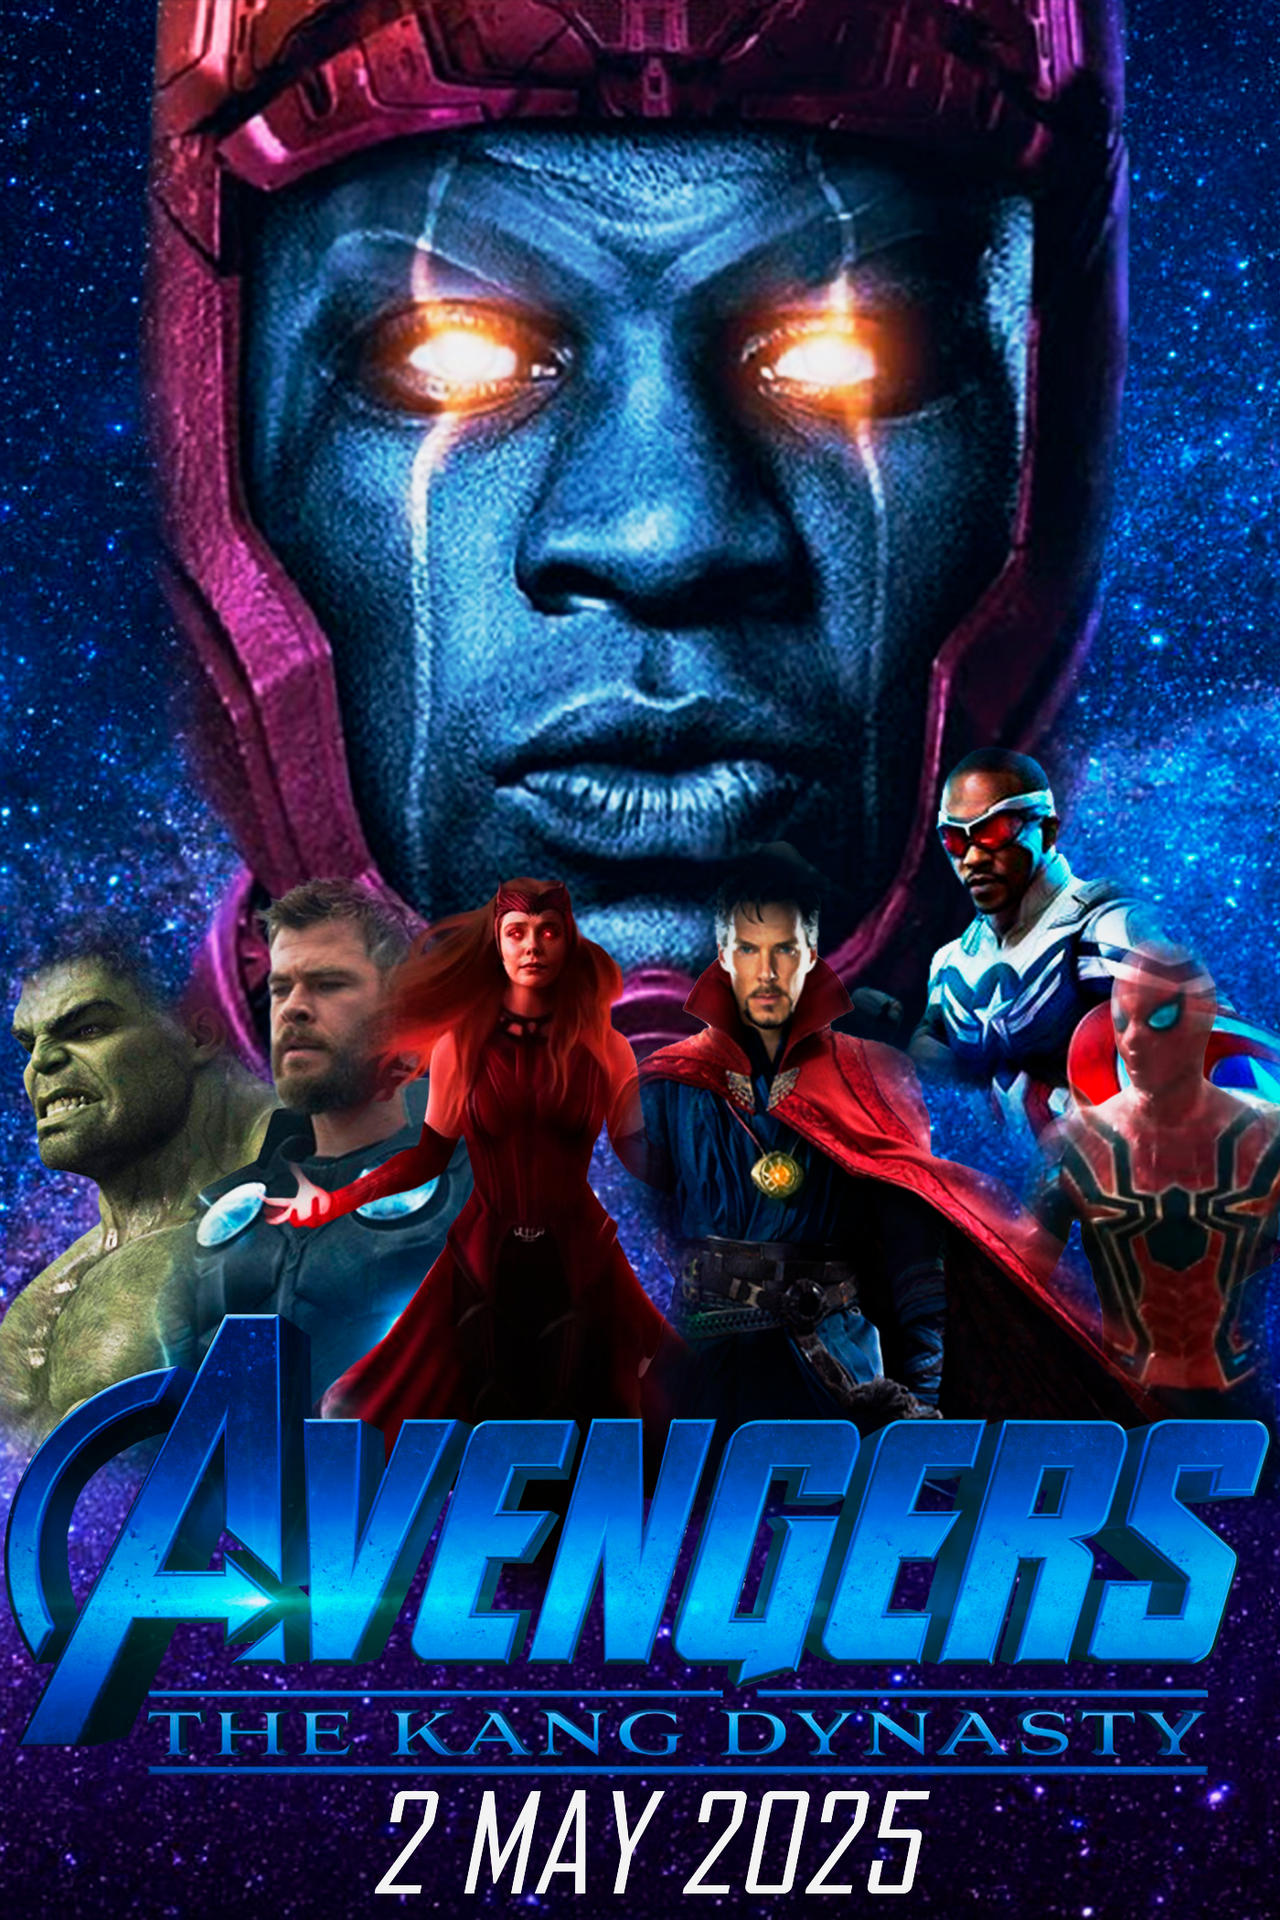 avengers the kang dynasty poster fun made by me by magbmkgcf on DeviantArt